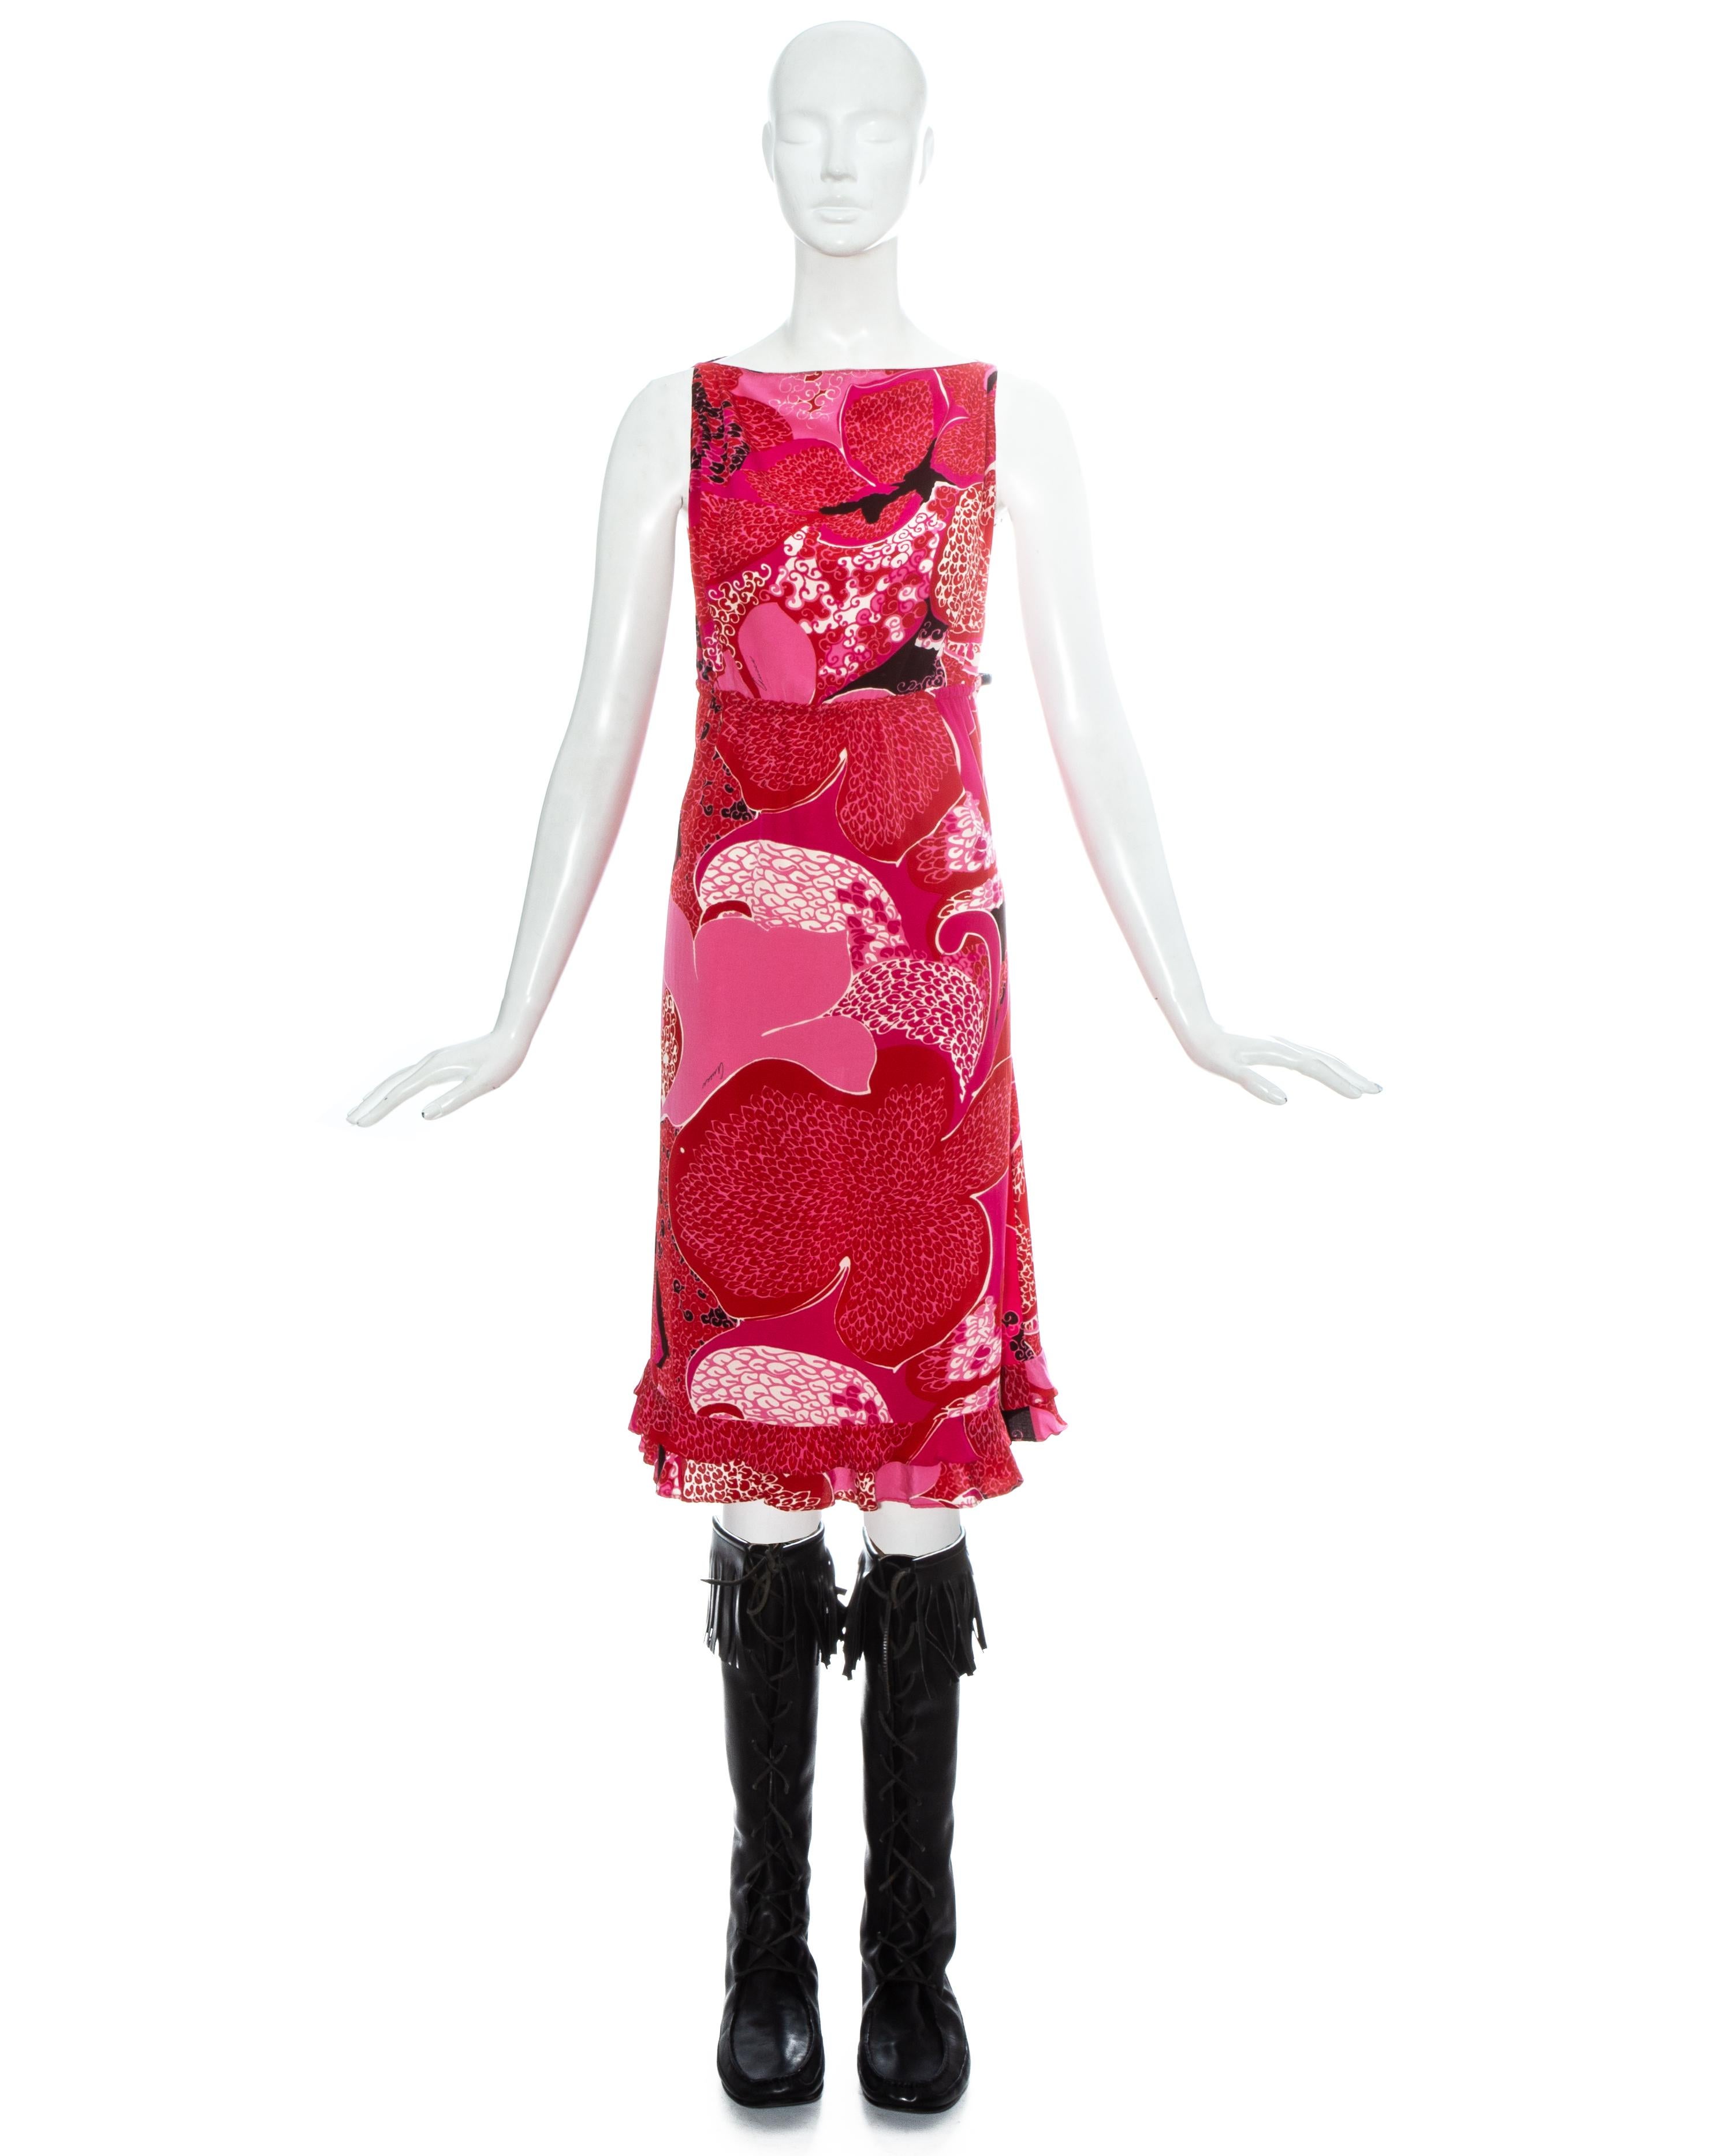 Gucci by Tom Ford pink and red floral printed silk sleeveless dress with ruffled hem and leather waistband. Sold with black leather knee high boots with fringed trim and lace up fastening. The complete ensemble worn on the runway (look